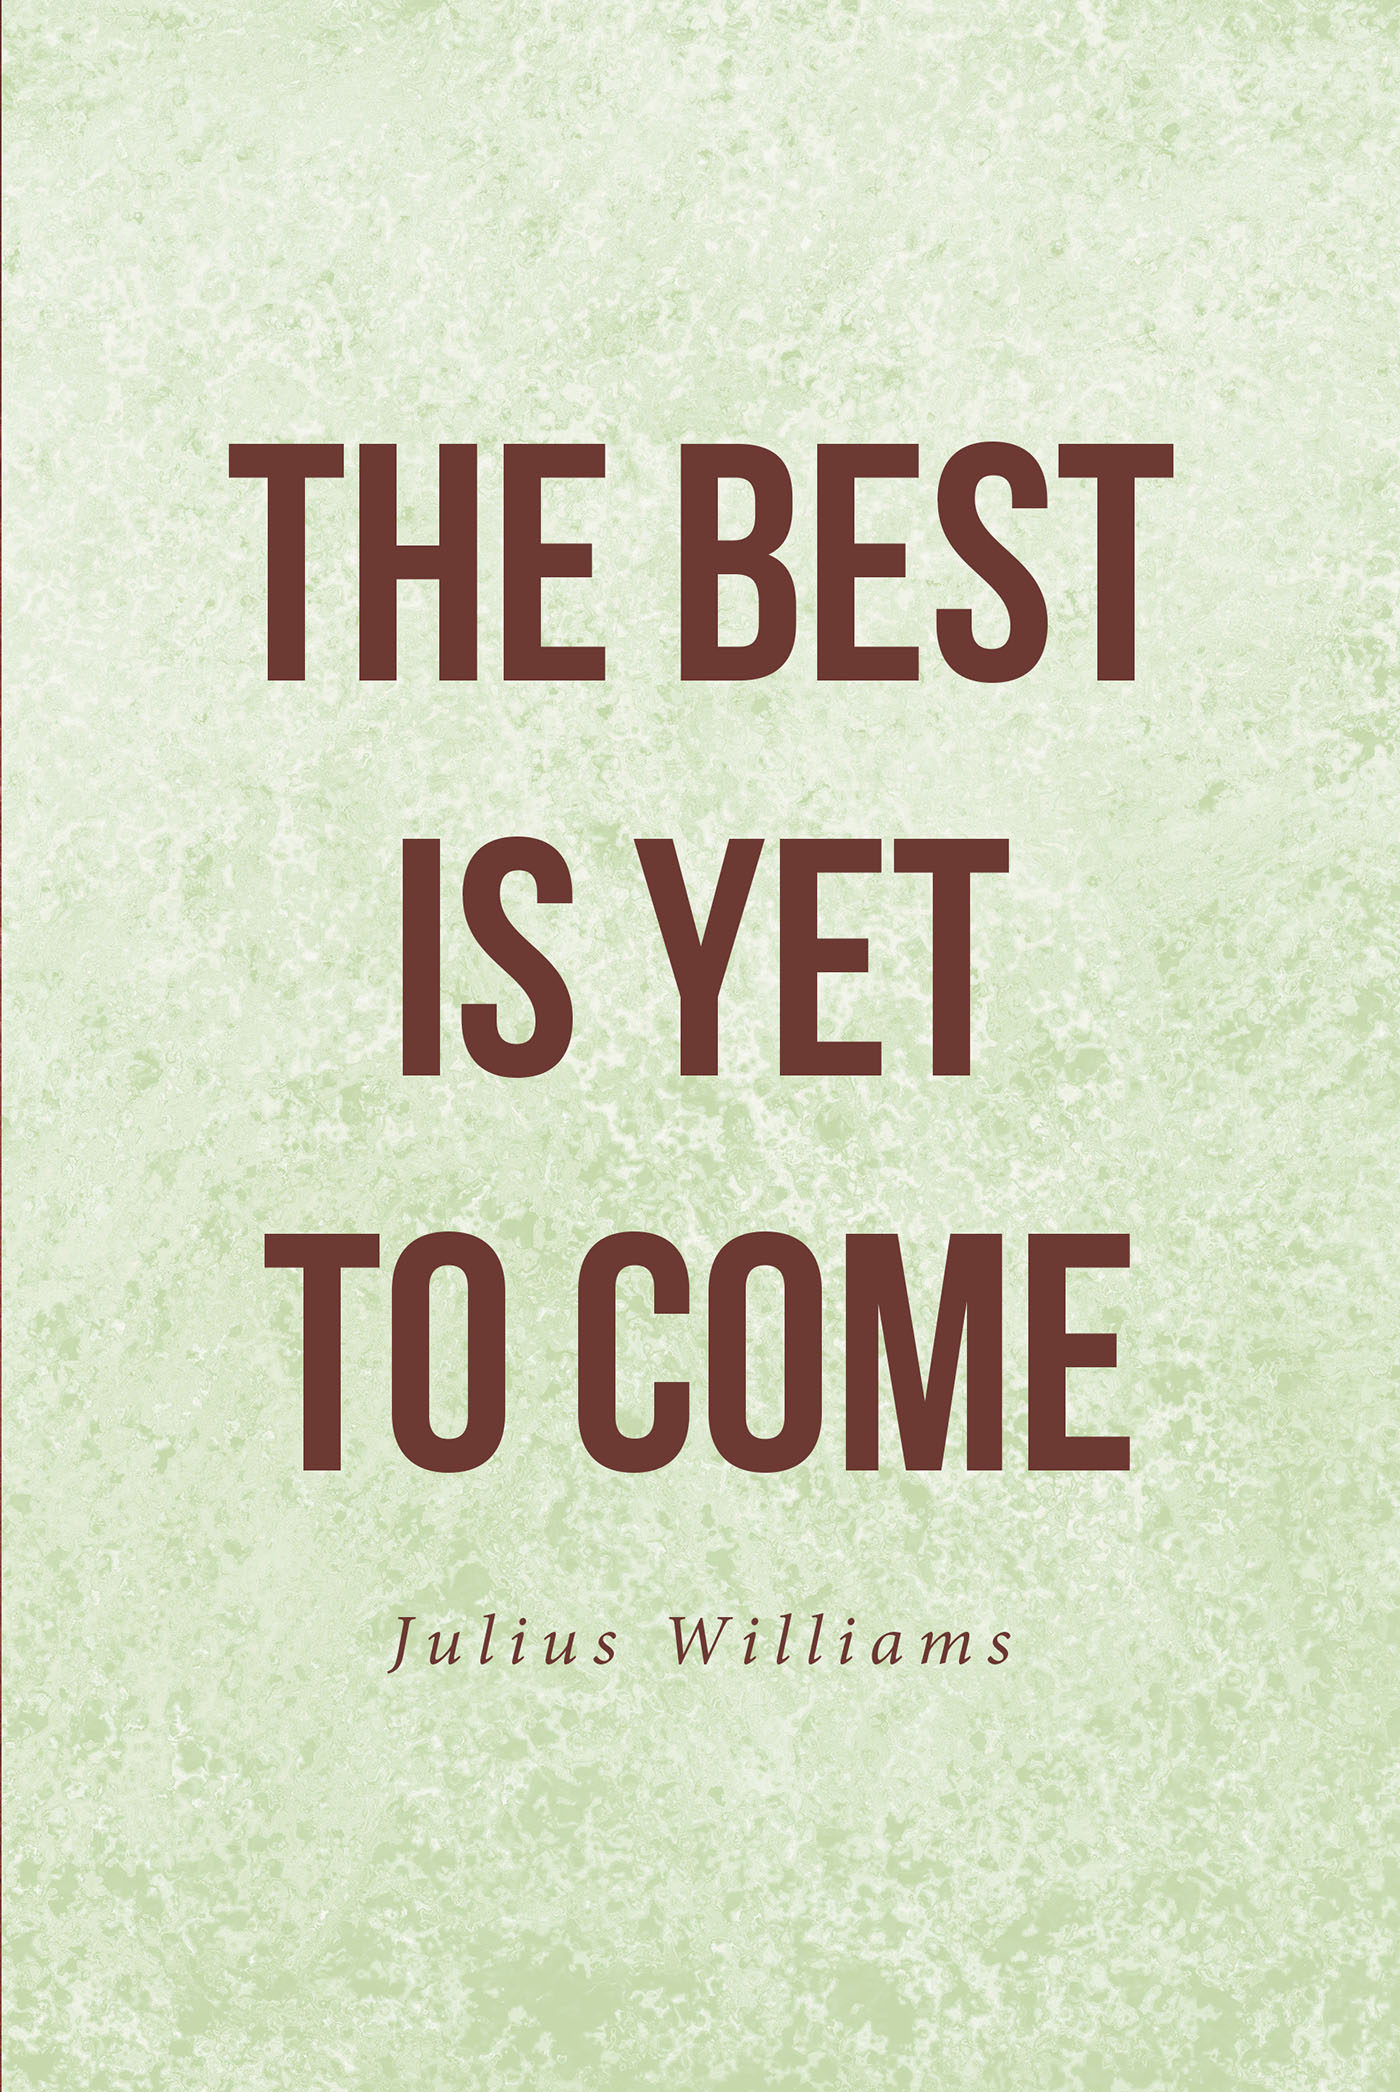 Author Julius Williams's New Book 'The Best is Yet to Come' is a  Faith-Based Read to Help One Gain Confidence and Self-Esteem Through Having  a Relationship With God | Newswire